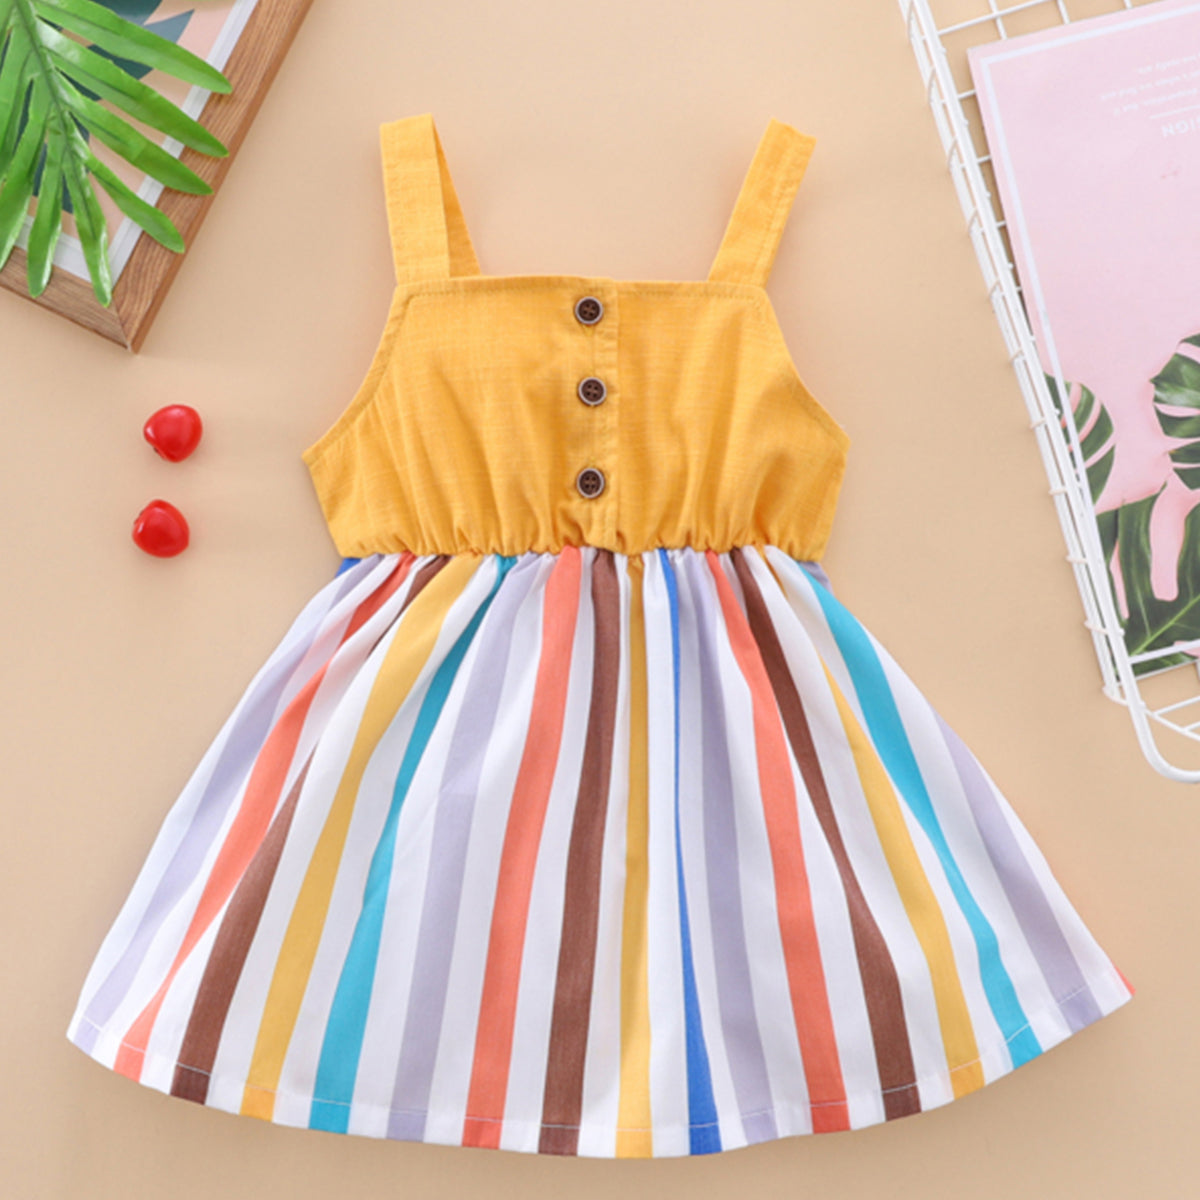 How to sew a sundress for baby - Sew Crafty Me